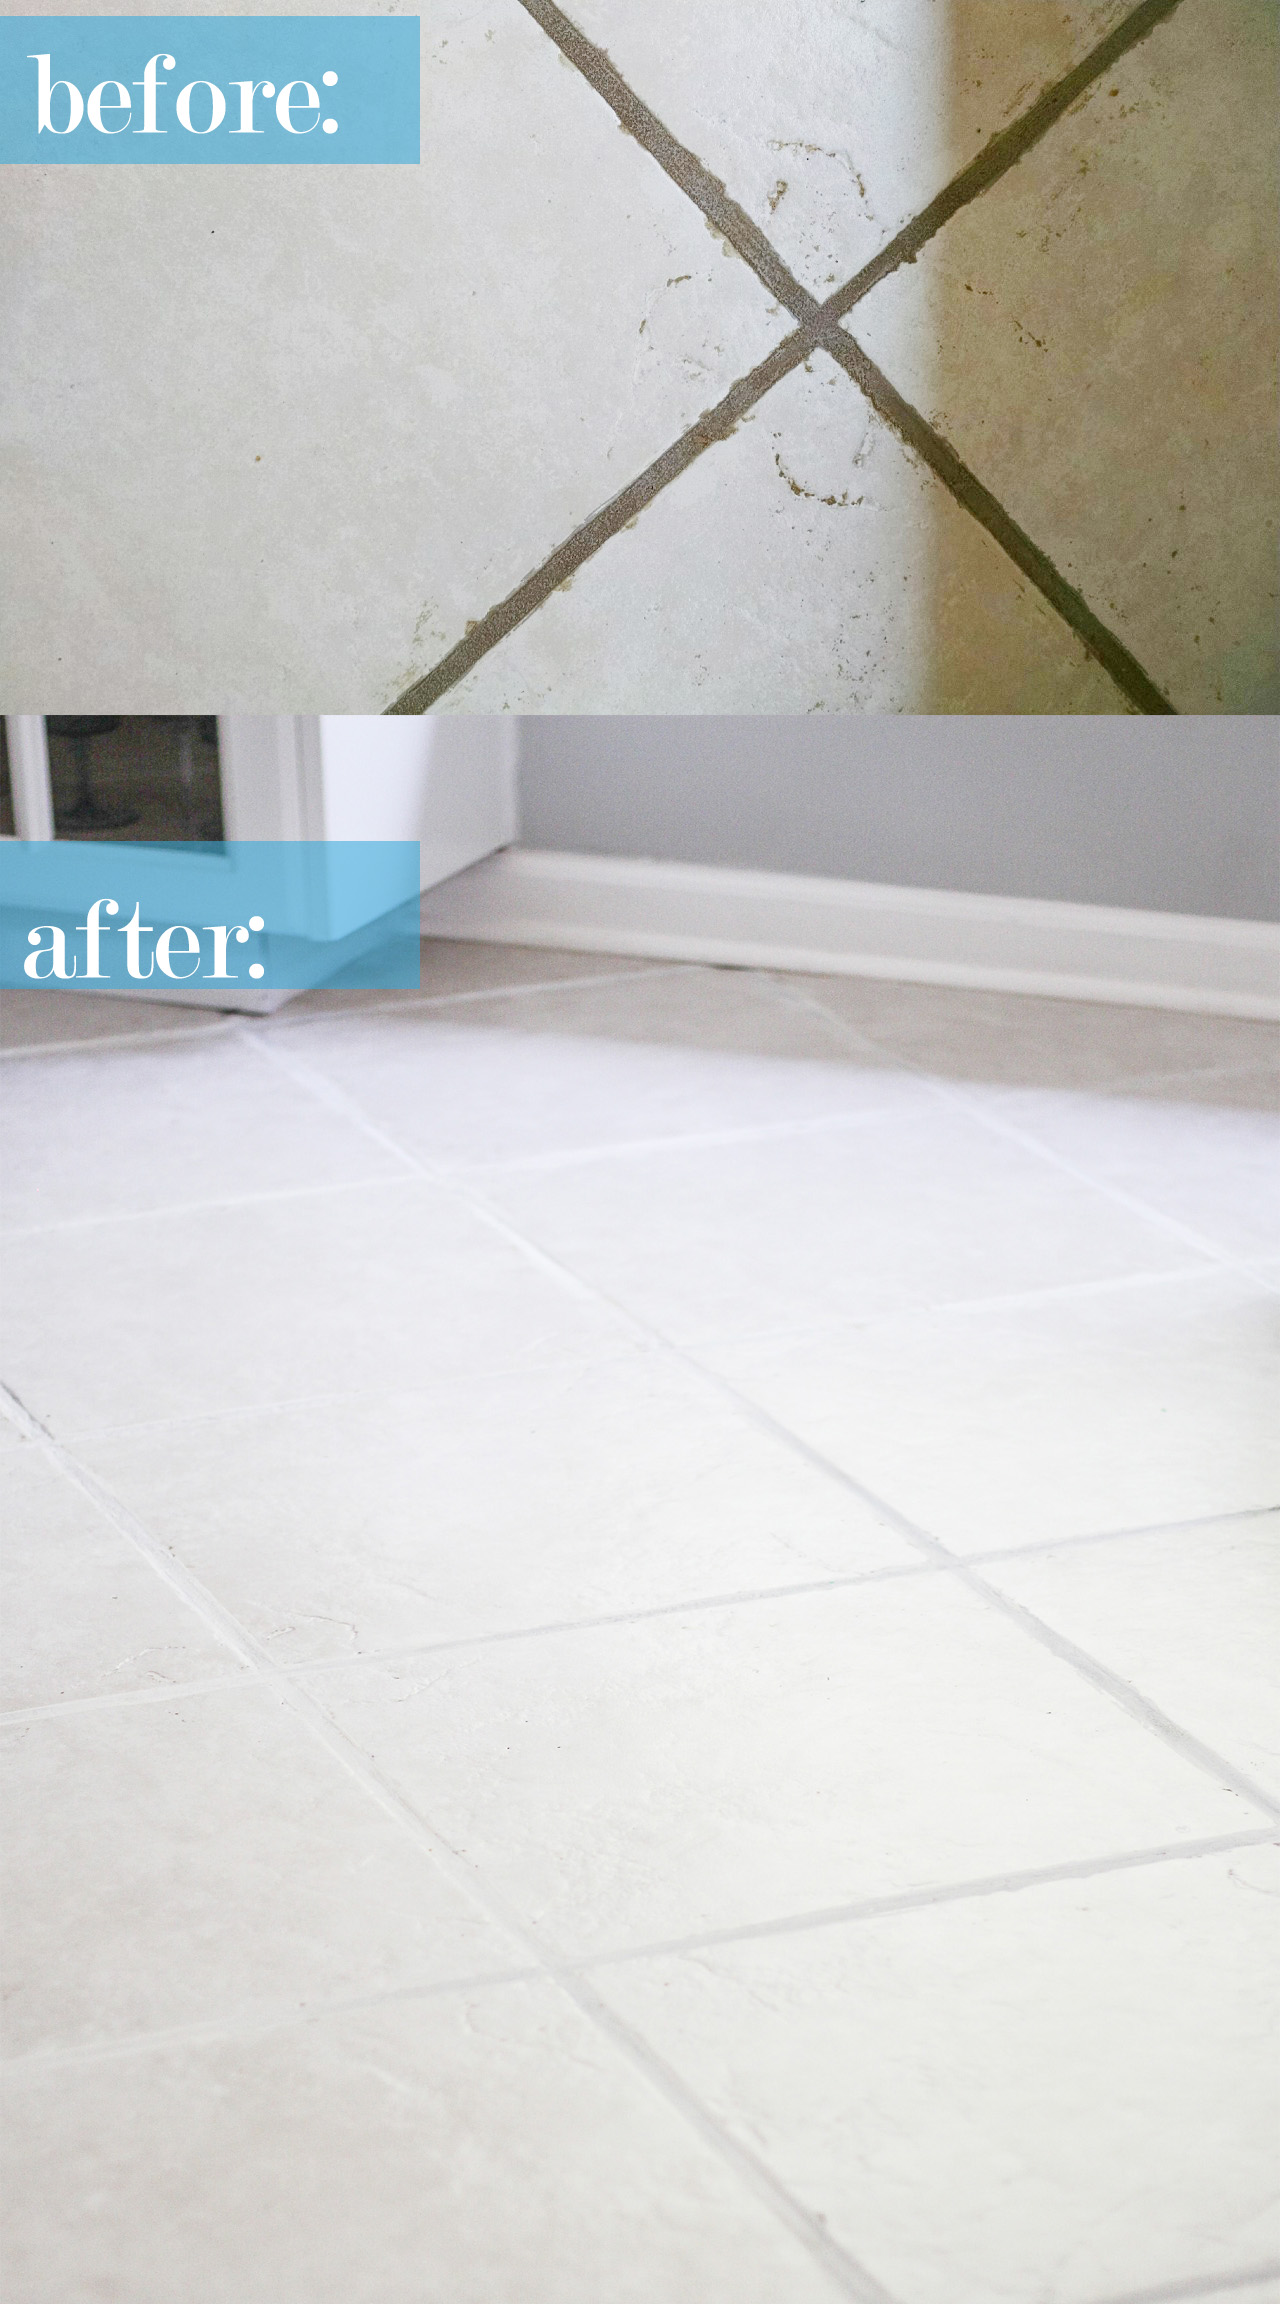 The Easiest Way to Clean Filthy, Neglected Tile Flooring